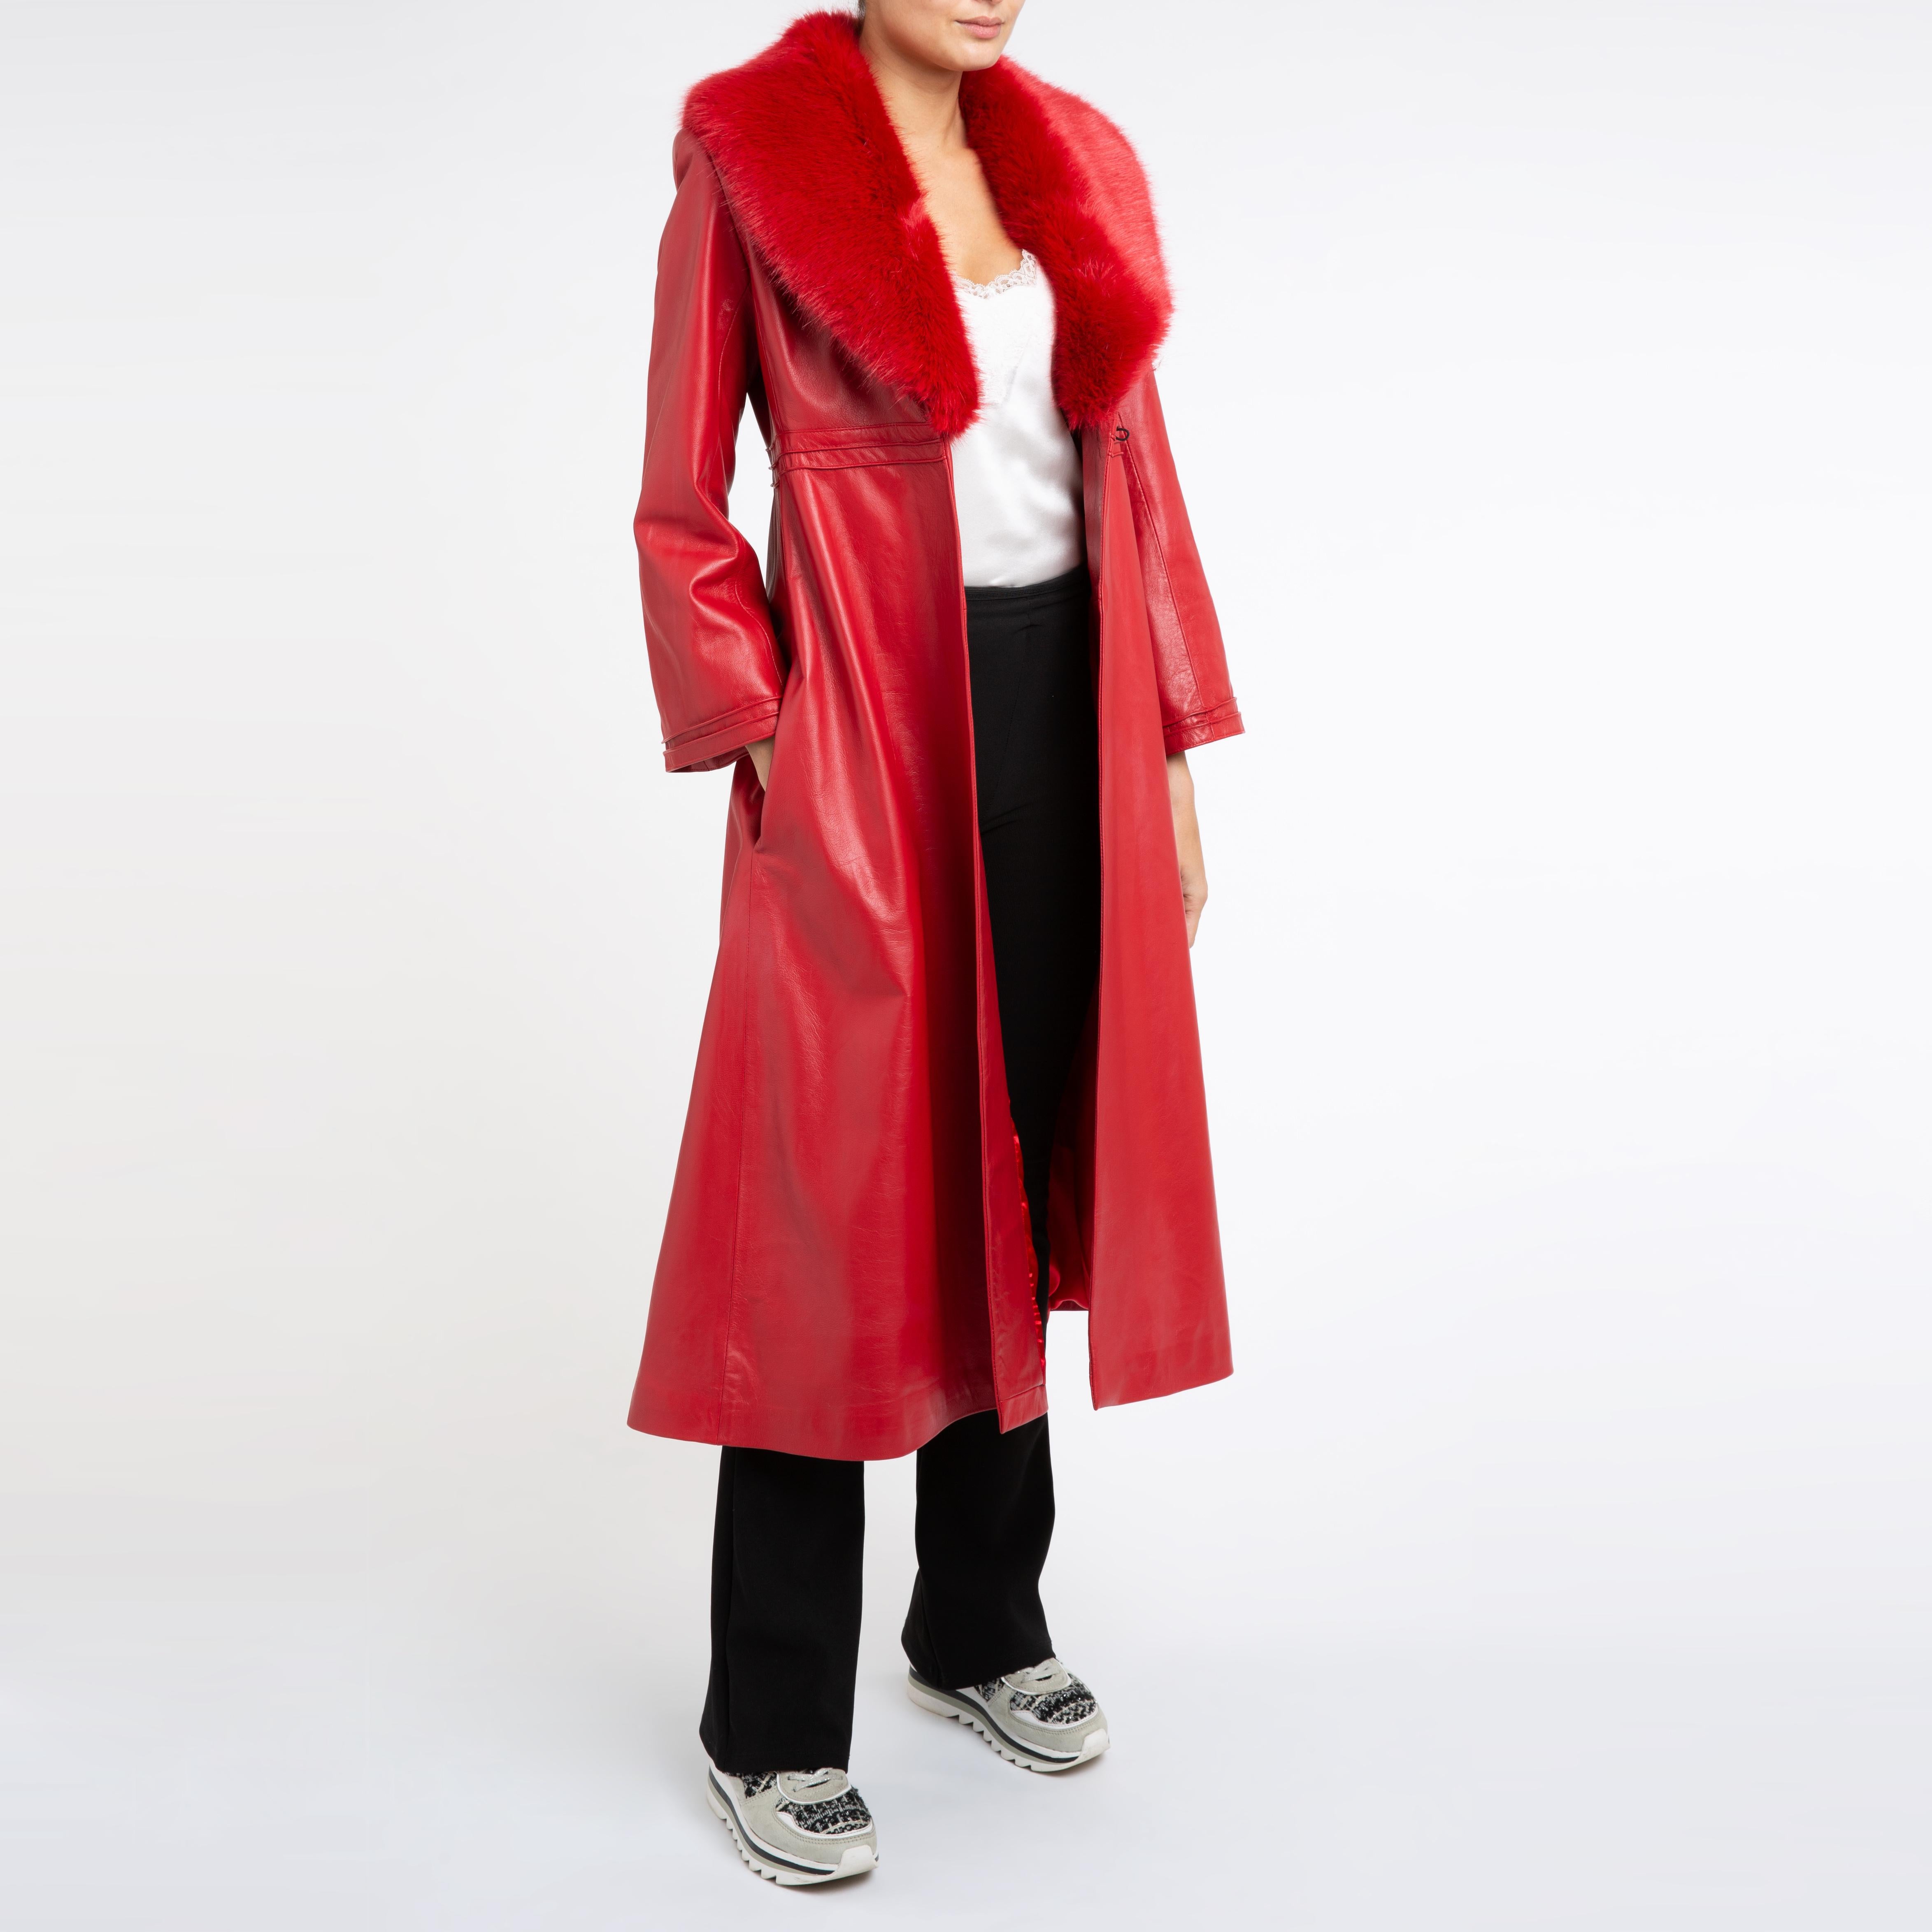 Verheyen London Edward Leather Coat with Faux Fur Collar in Red - Size uk 10 For Sale 3